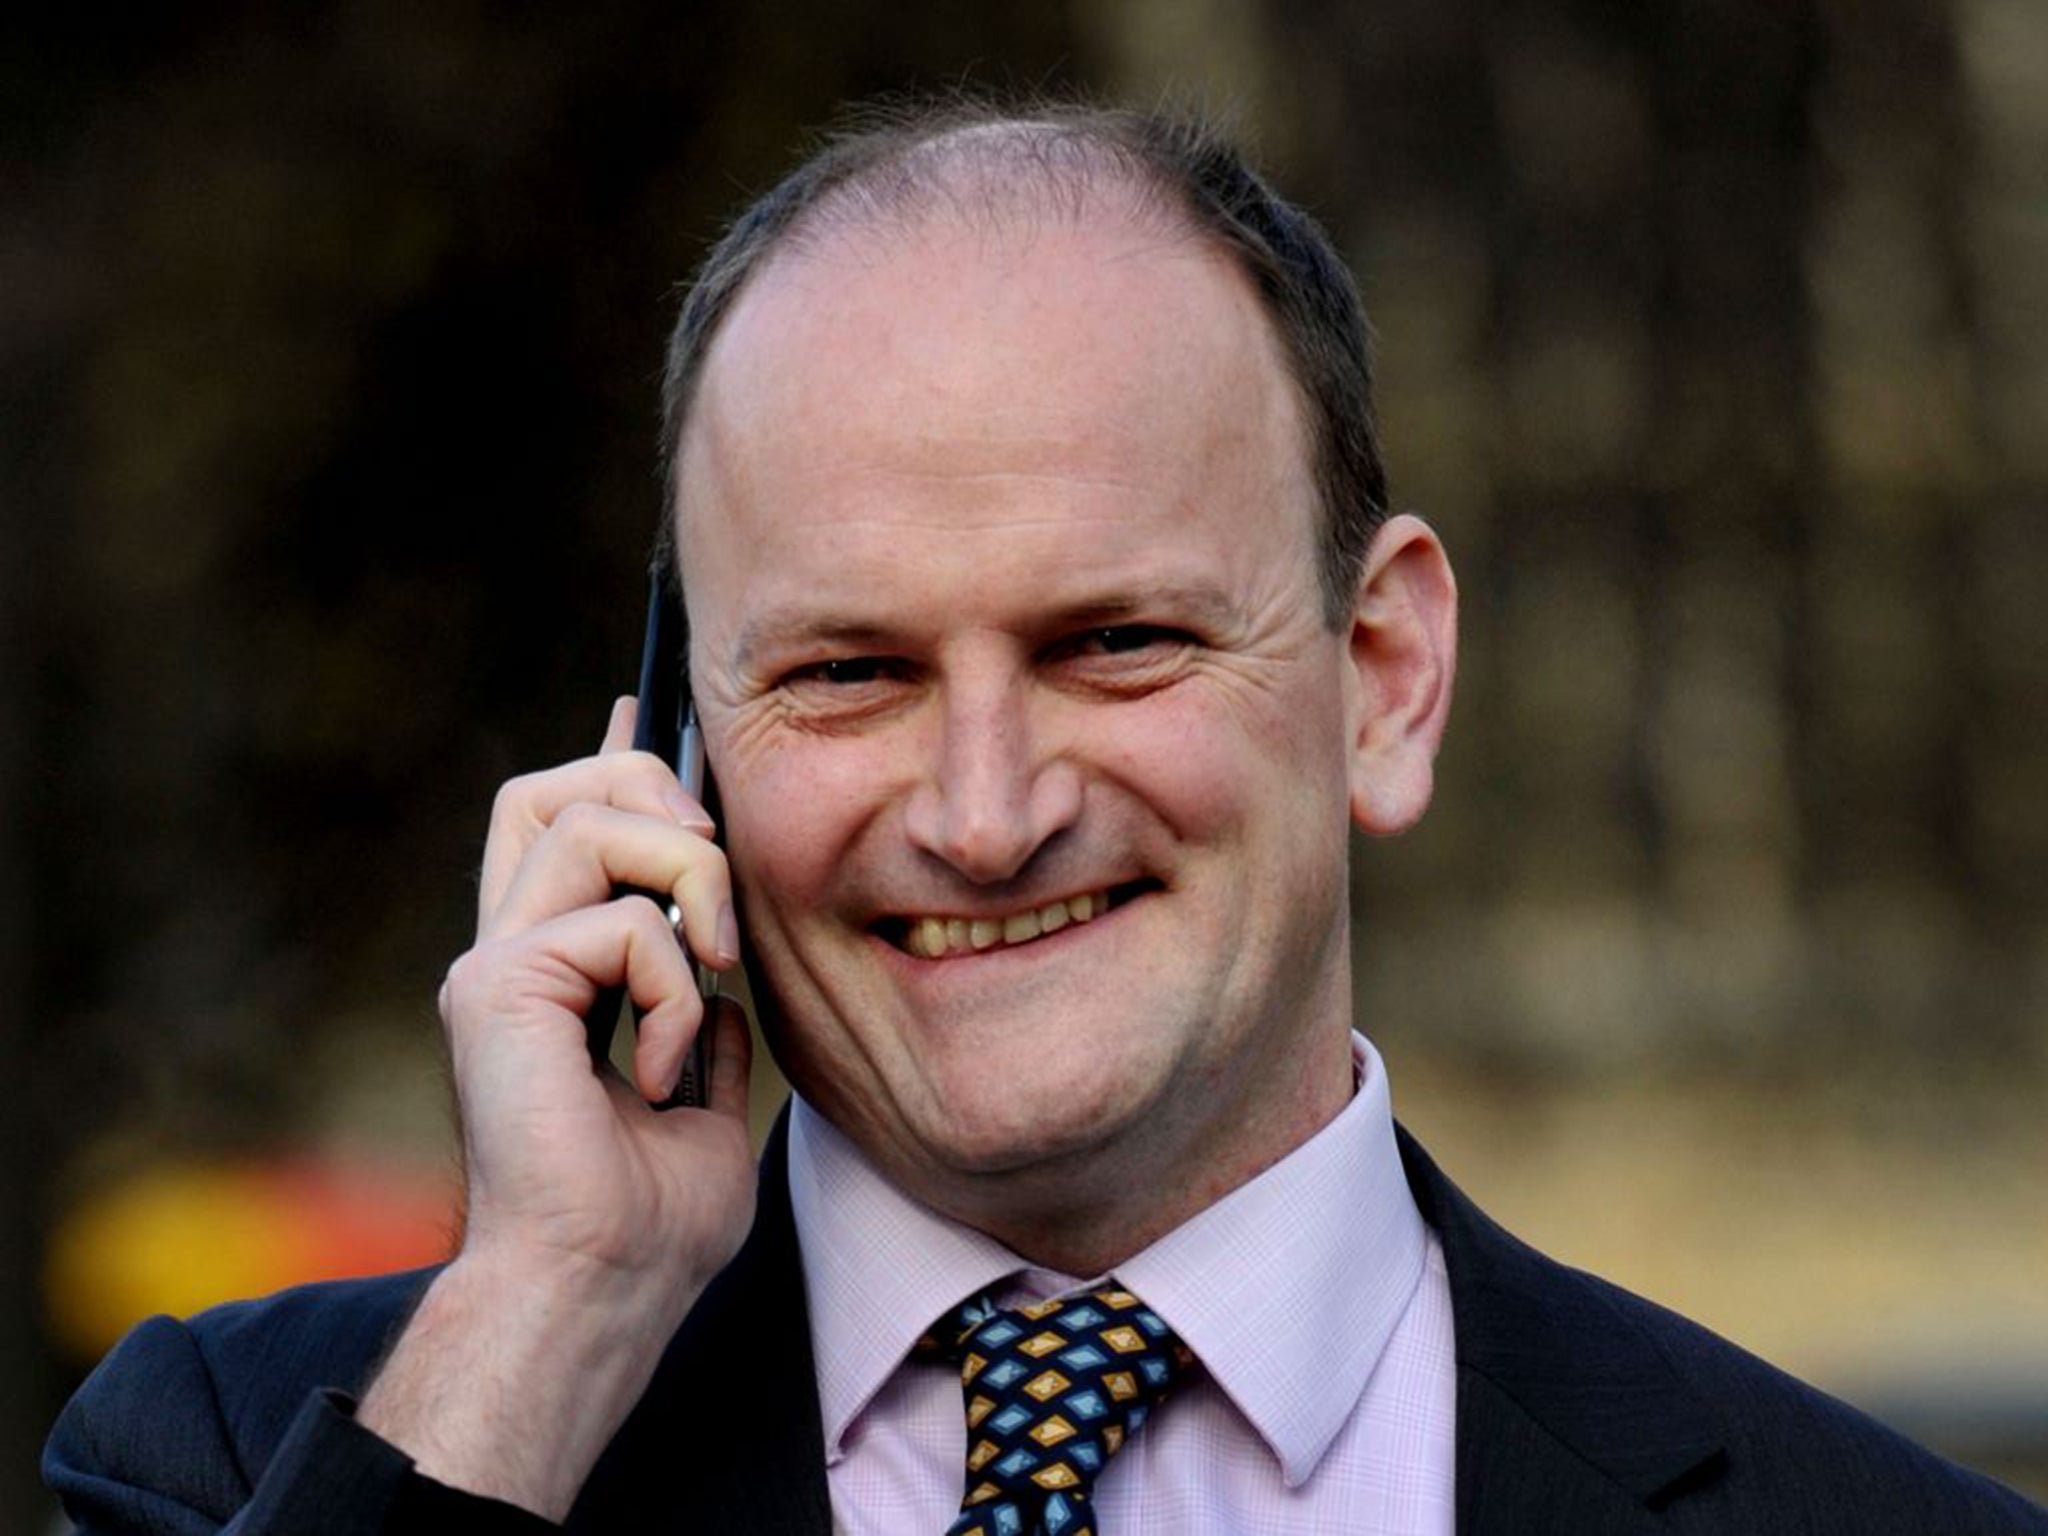 Ukip received nearly four million votes last year, but ended up with only one MP, Douglas Carswell